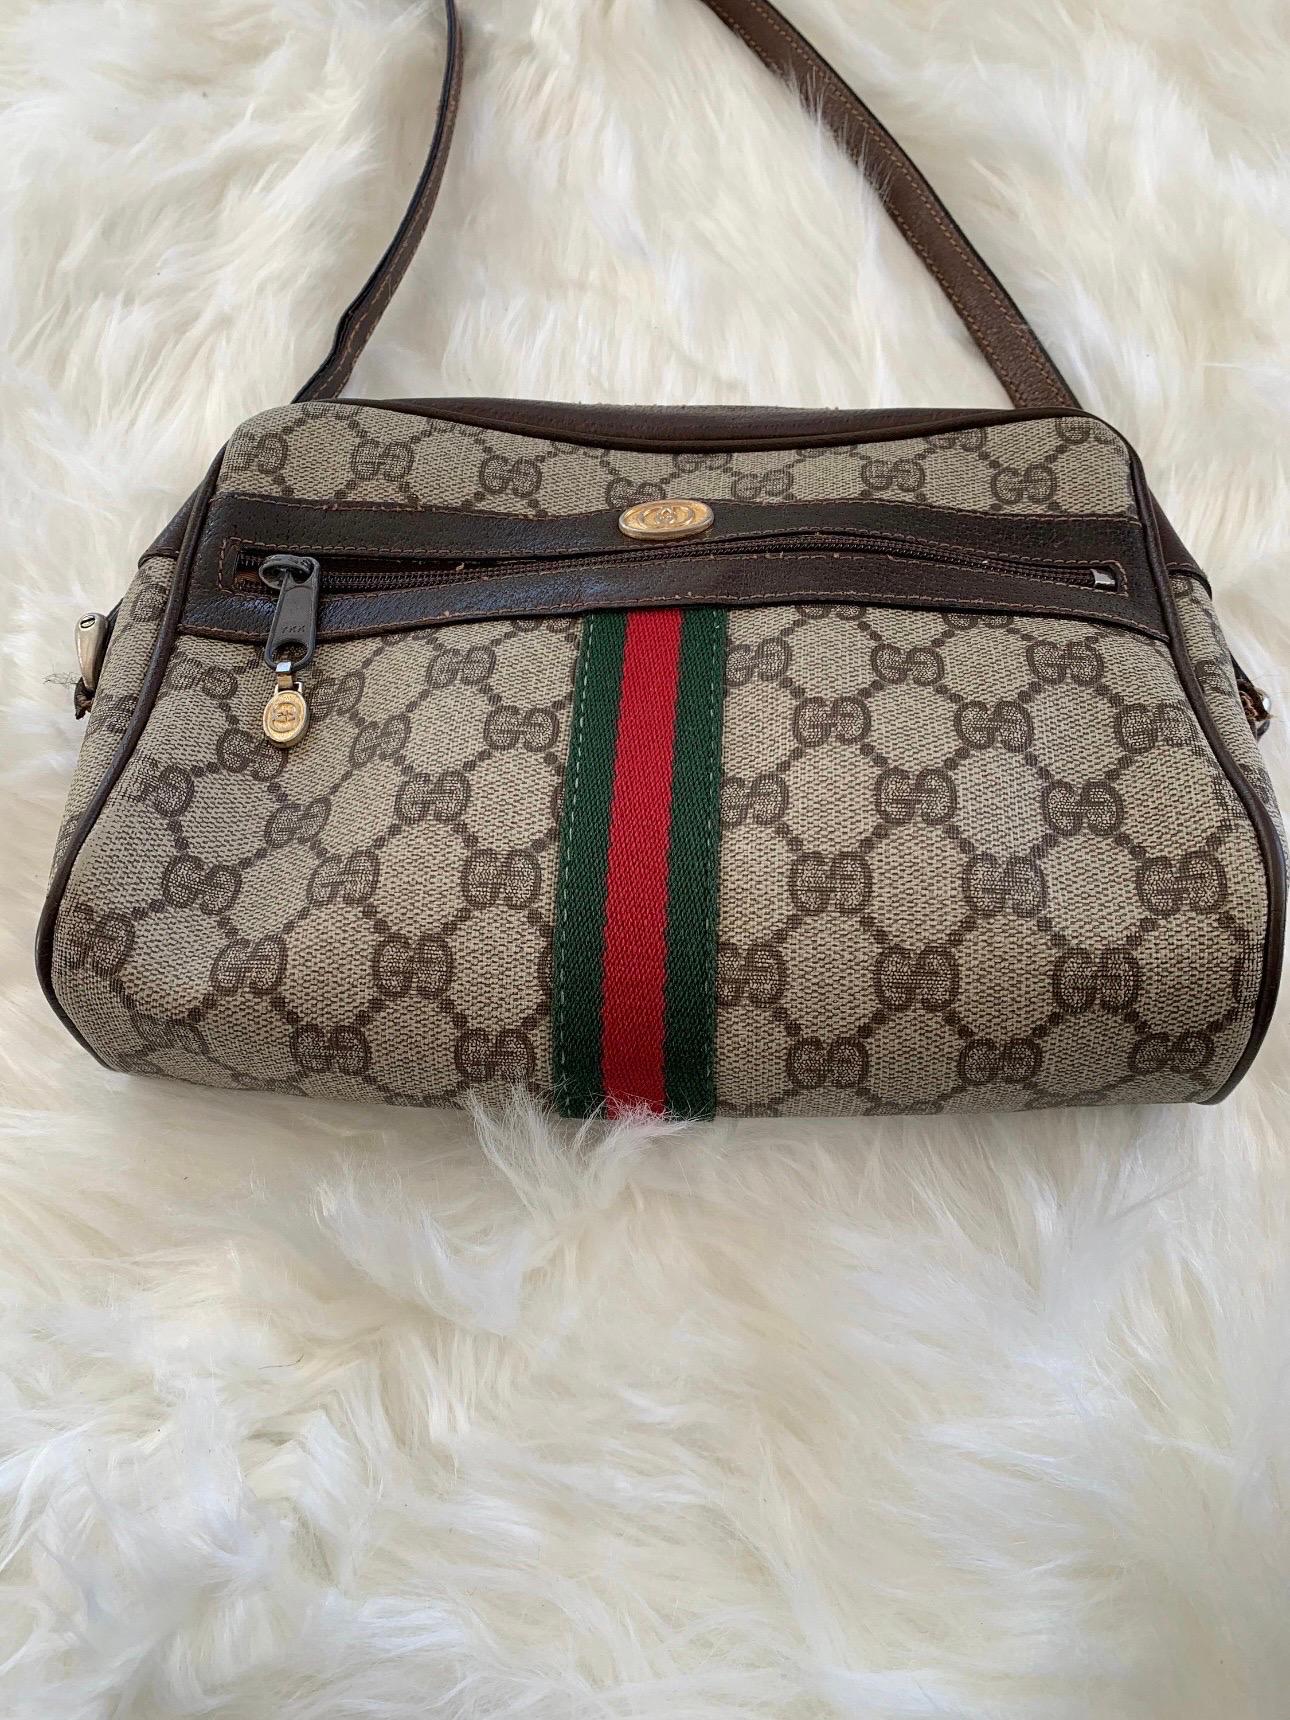 🖤Classic Gucci Ophidia Crossbody🖤

Such a classic and essential piece for your wardrobe! Iconic red and green web stripe is instantly recognizable and pops against the brown GG monogram. 

Condition:
This bag is in vintage condition with some